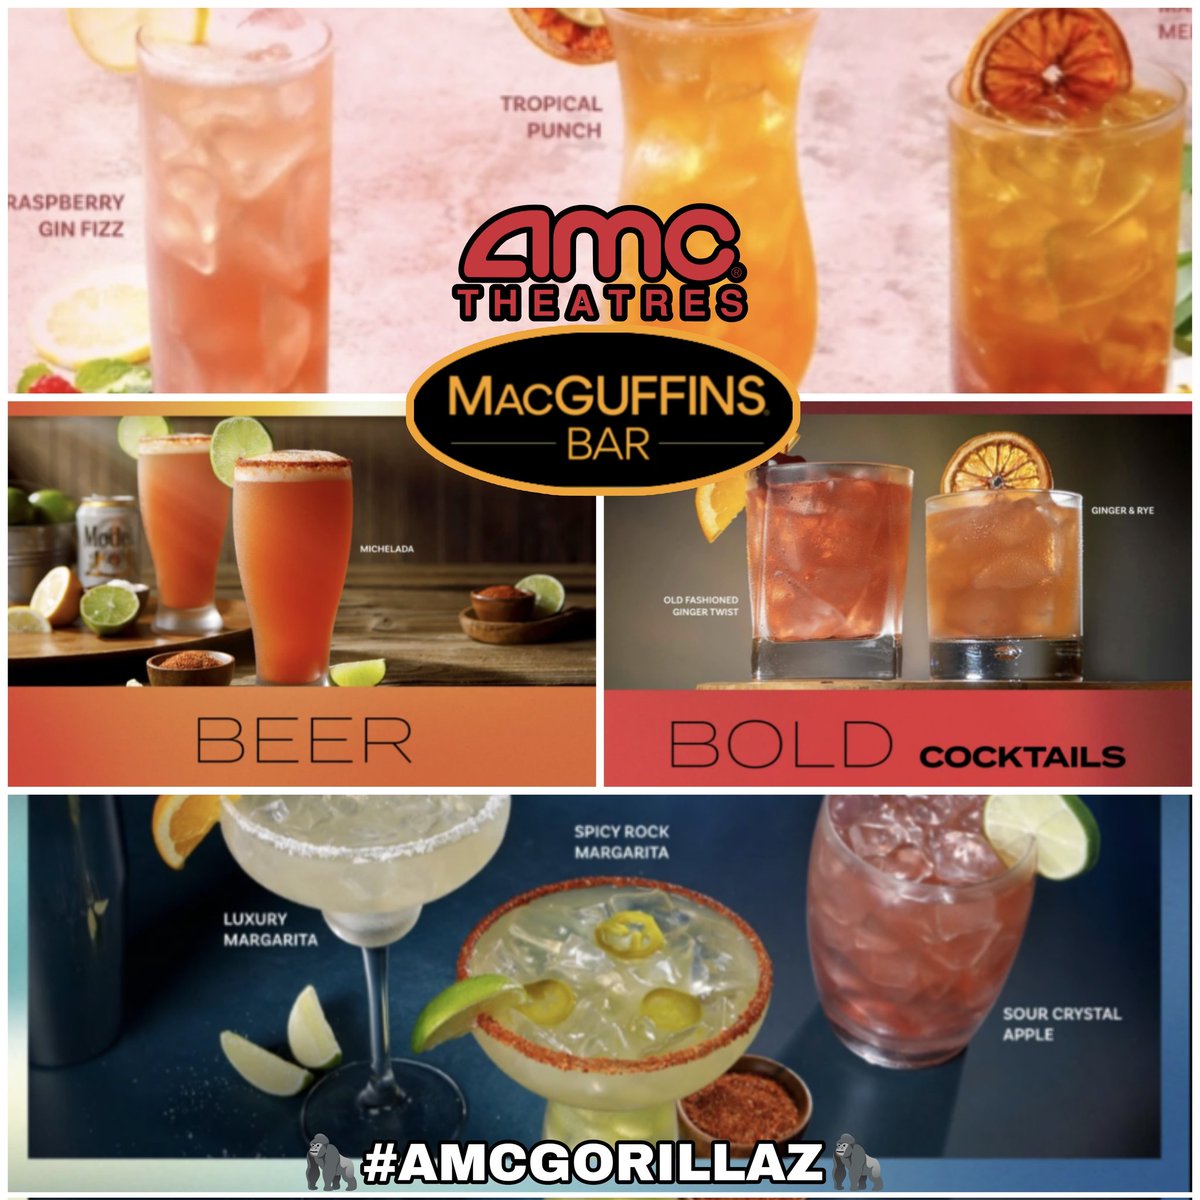 @Blog_Mickey Not all Indiana Jones fans can make it out to Disney Hollywood Studios for drinks.  🍺🥃🍸🍷

What's the next best place?
That's MacGuffins bar, at AMC ❤️
@AMCTheatres 🍿🎥 @DisneyStudios 
@IndianaJones #IndianaJones 
#IndianaJonesAndTheDialofDestiny
#AMCGORILLAZ🦍🦍